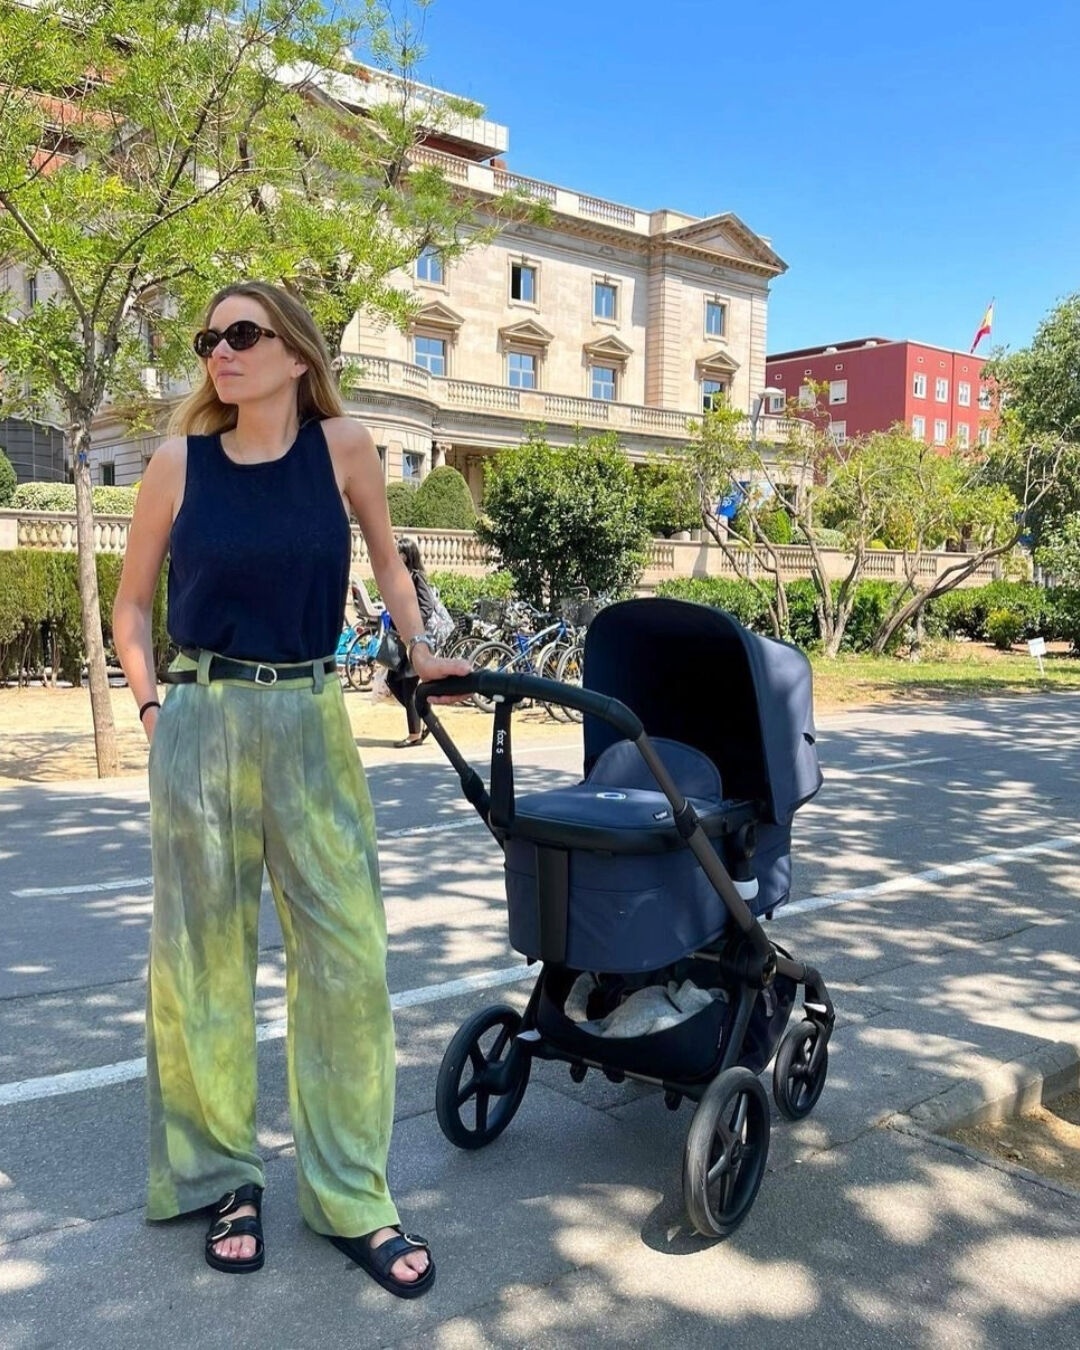 A mom poses next to her baby in a Bugaboo Fox 5. They're in an outdoor area with trees and European-style buildings in the background.